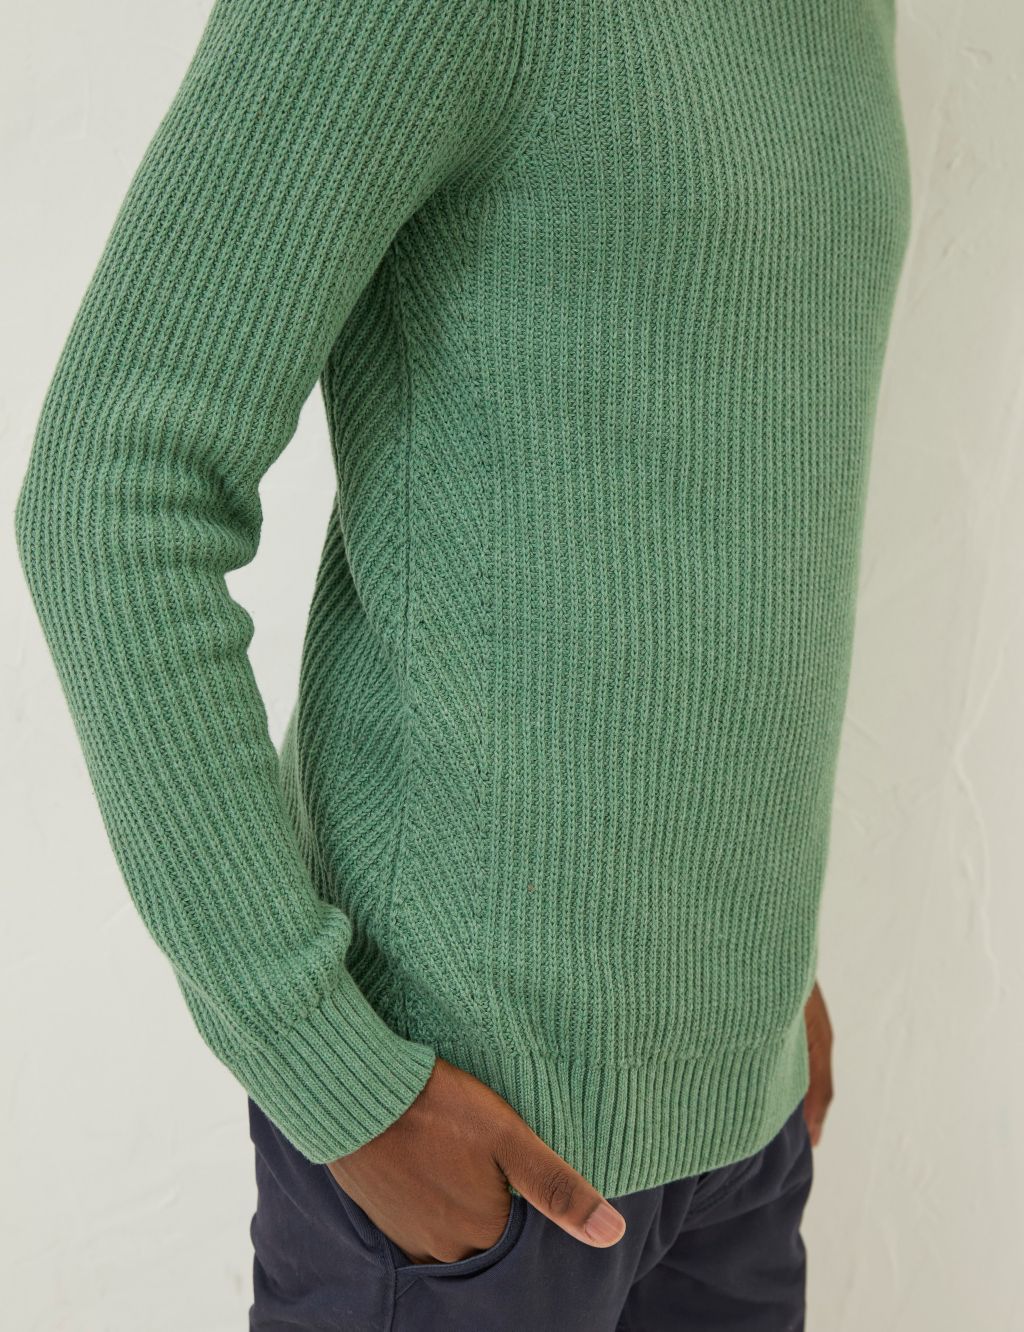 Pure Cotton Ribbed Crew Neck Jumper image 4